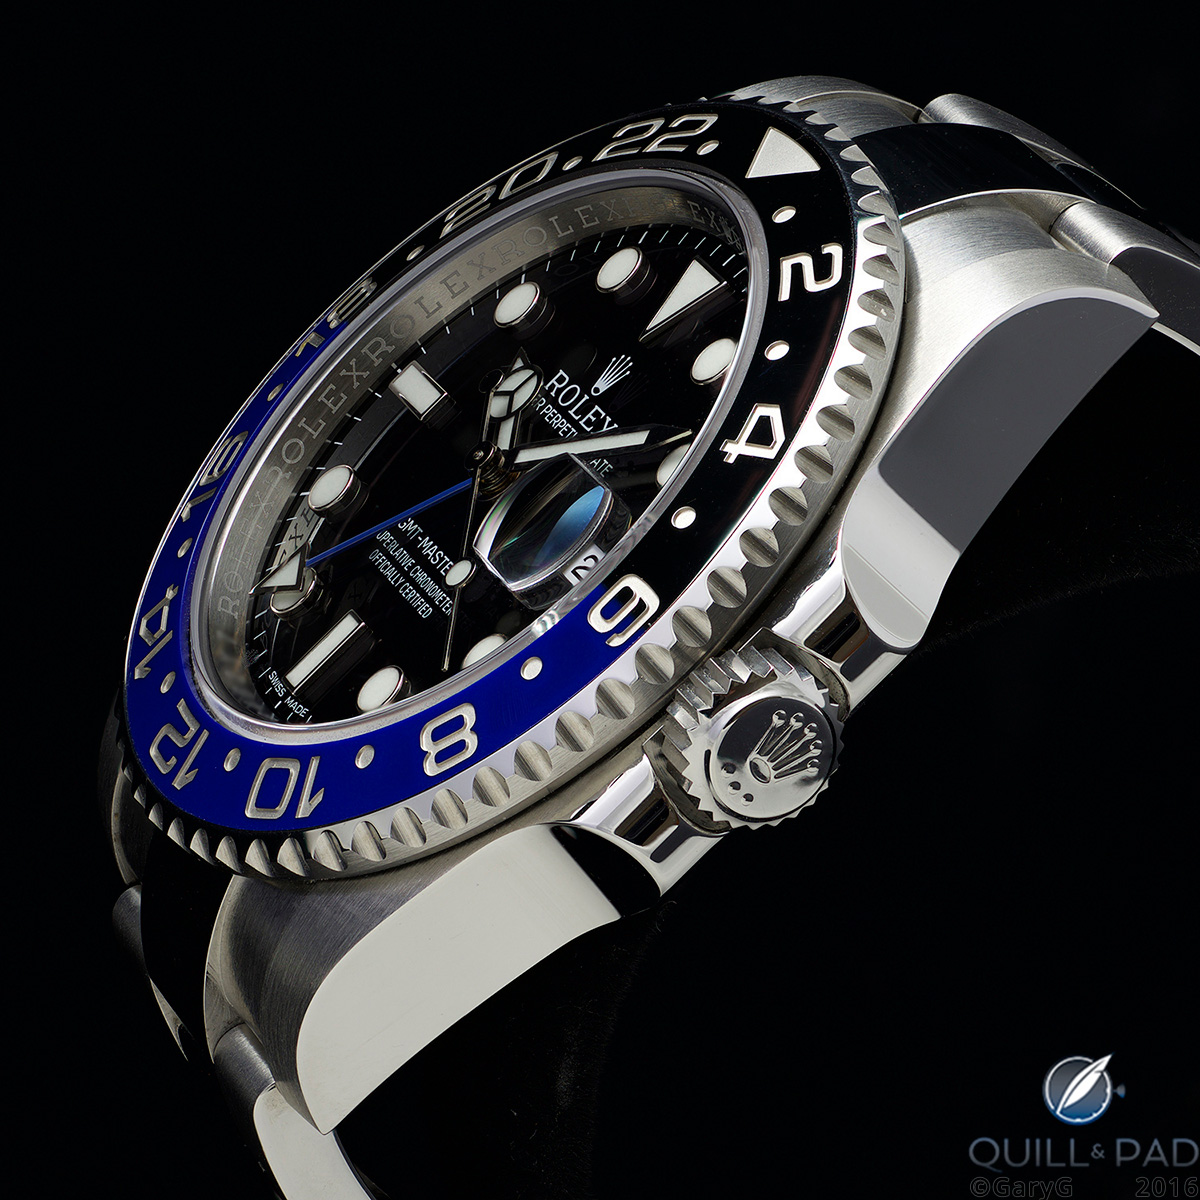 Rolex GMT Master II: too hot, too cold, or just right?